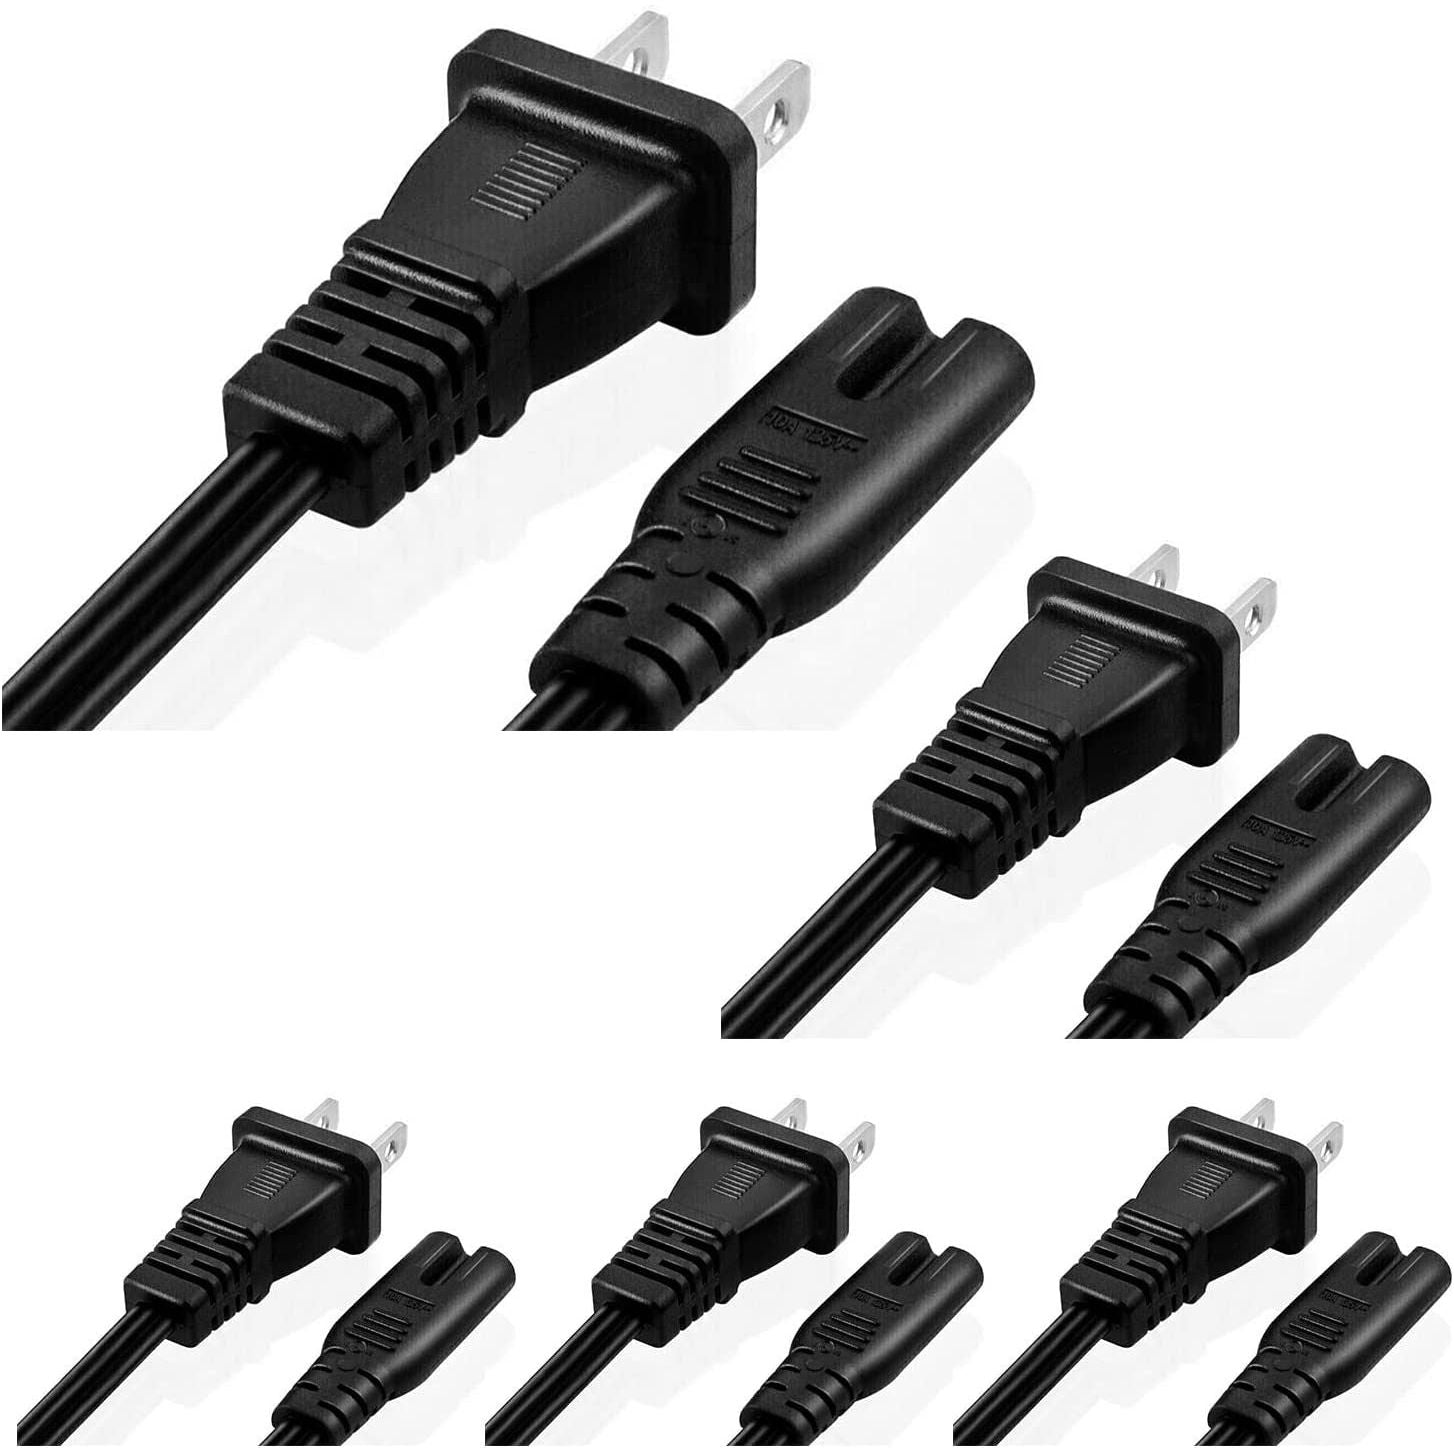 5 Core Extra Long 6ft 2 Prong 2 pack Non-Polarized AC Wall Power Cable 2 Slot Cord for HP Dell Samsung Sony Asus Acer Toshiba Laptop Charger LED LCD Monitor Replacement Power Cord PP 1001